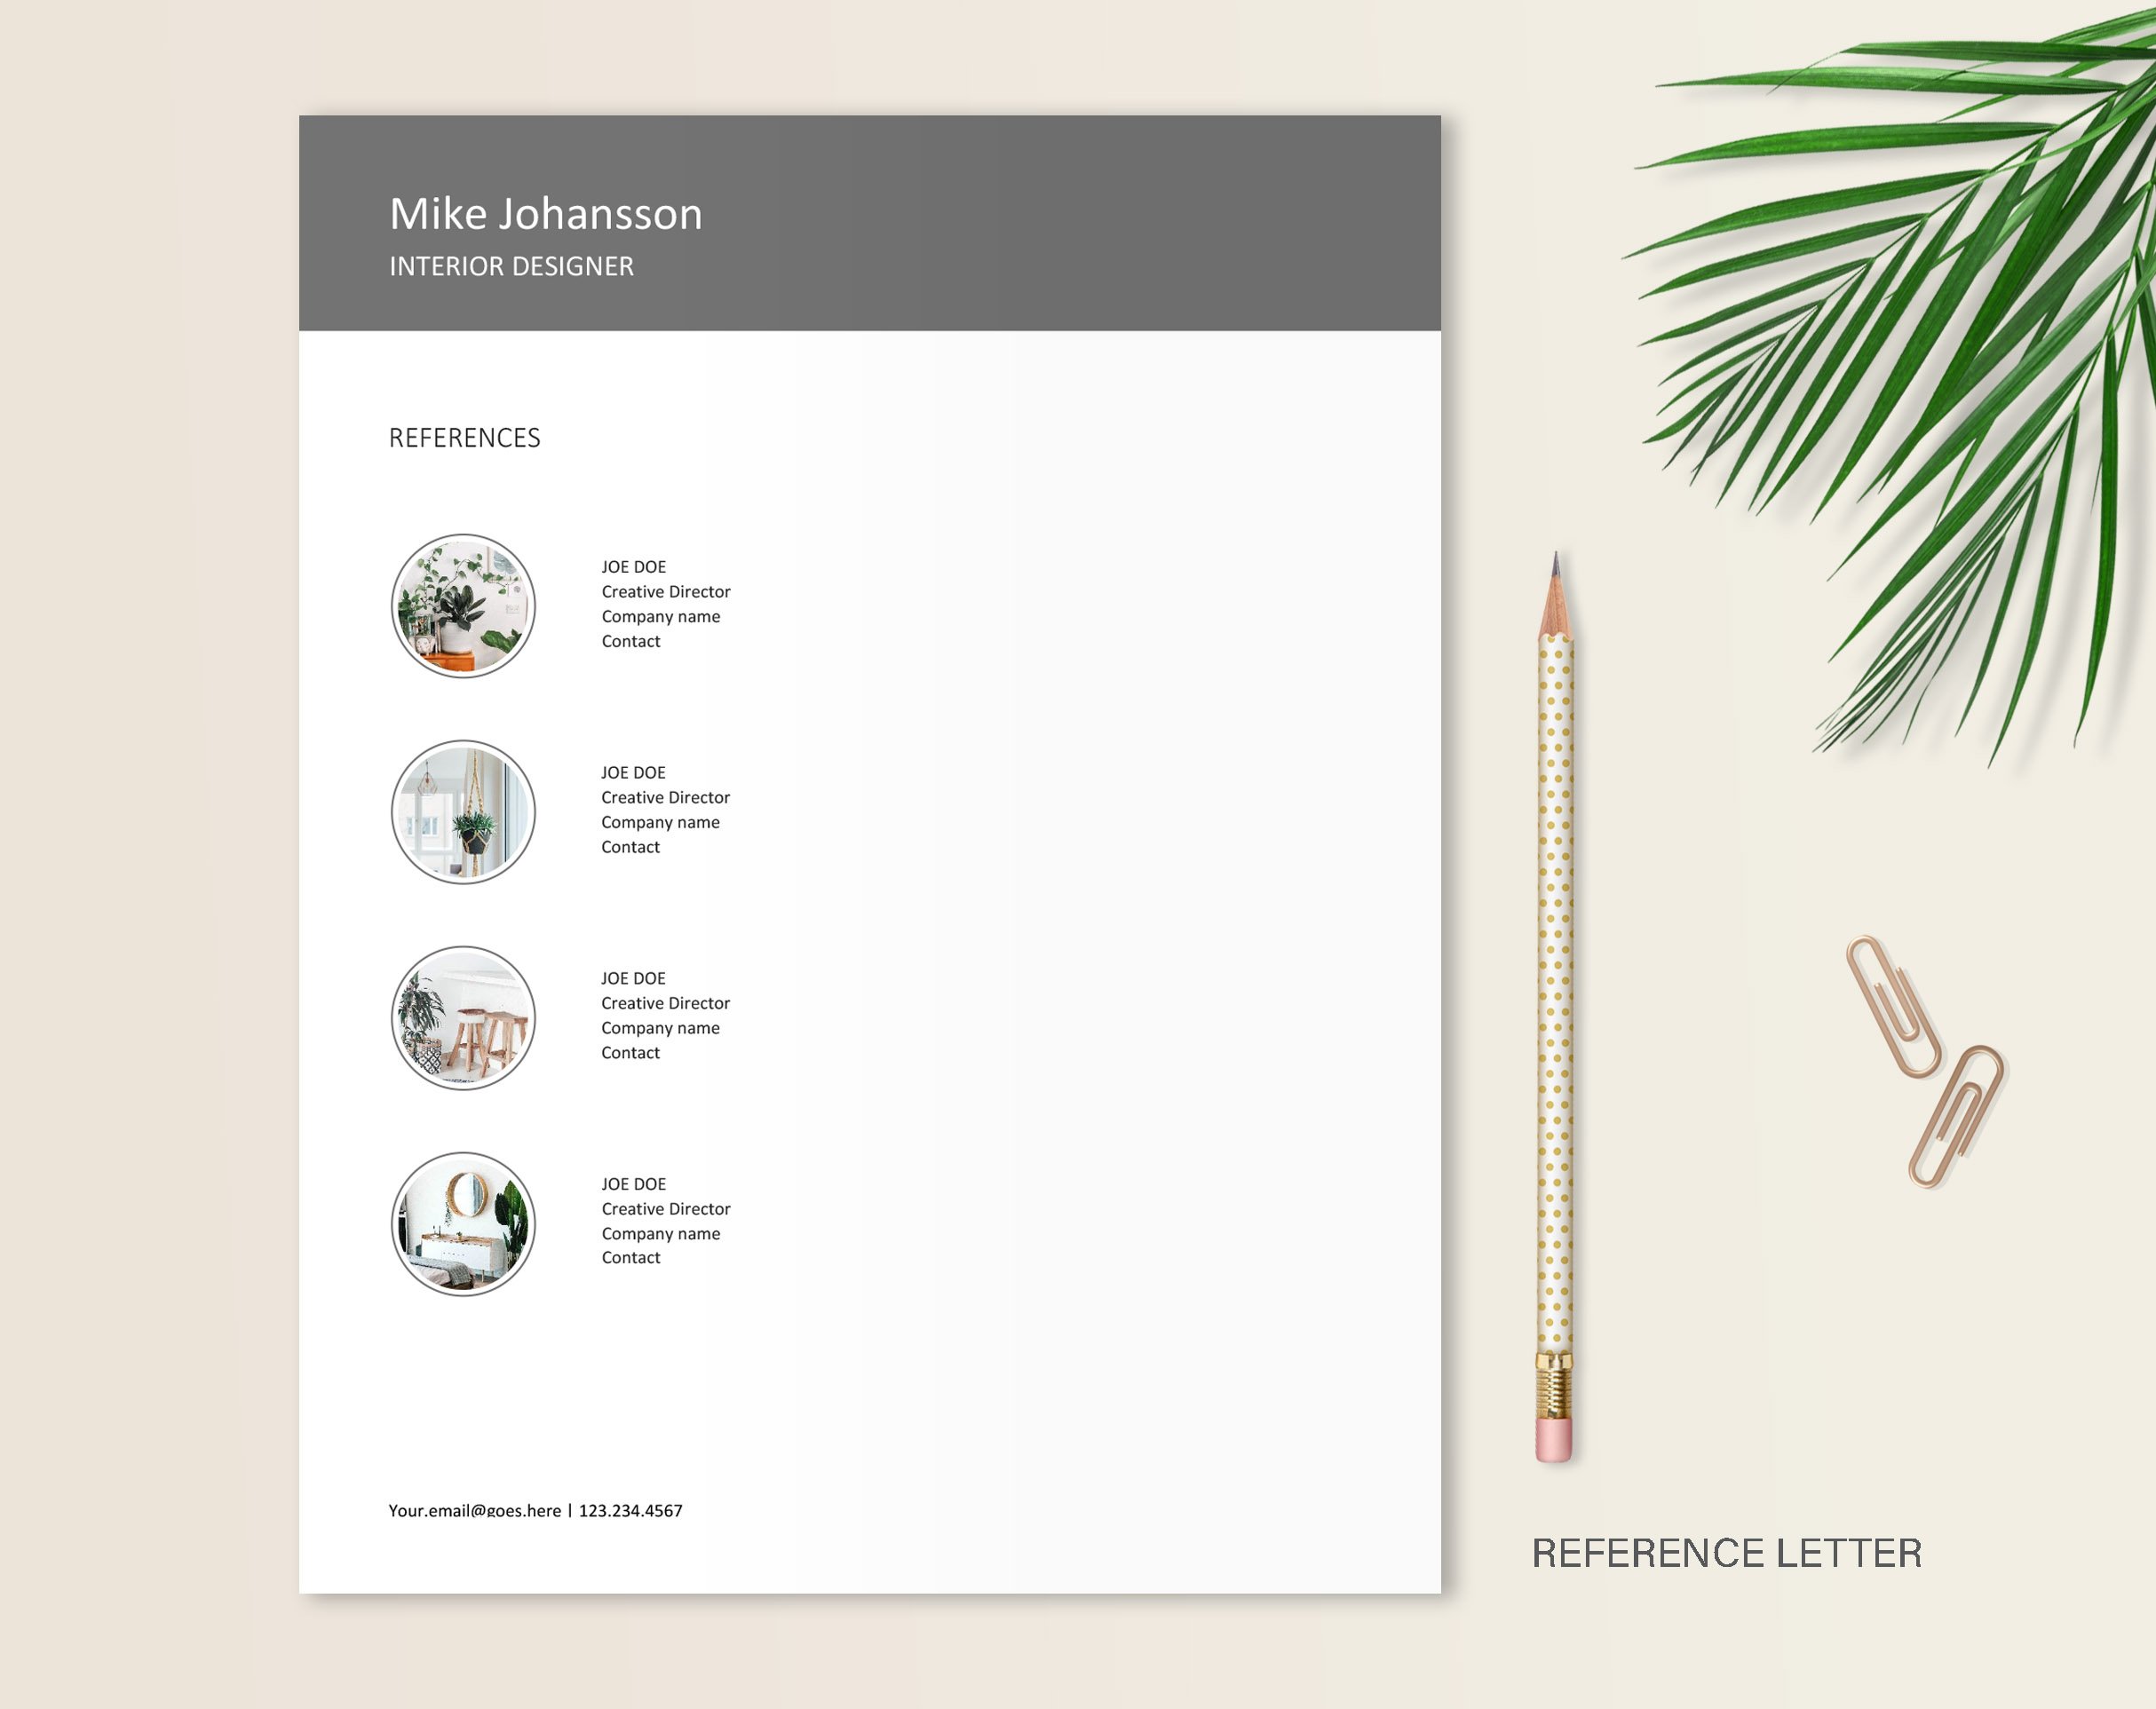 Resume template with a pencil and a plant.